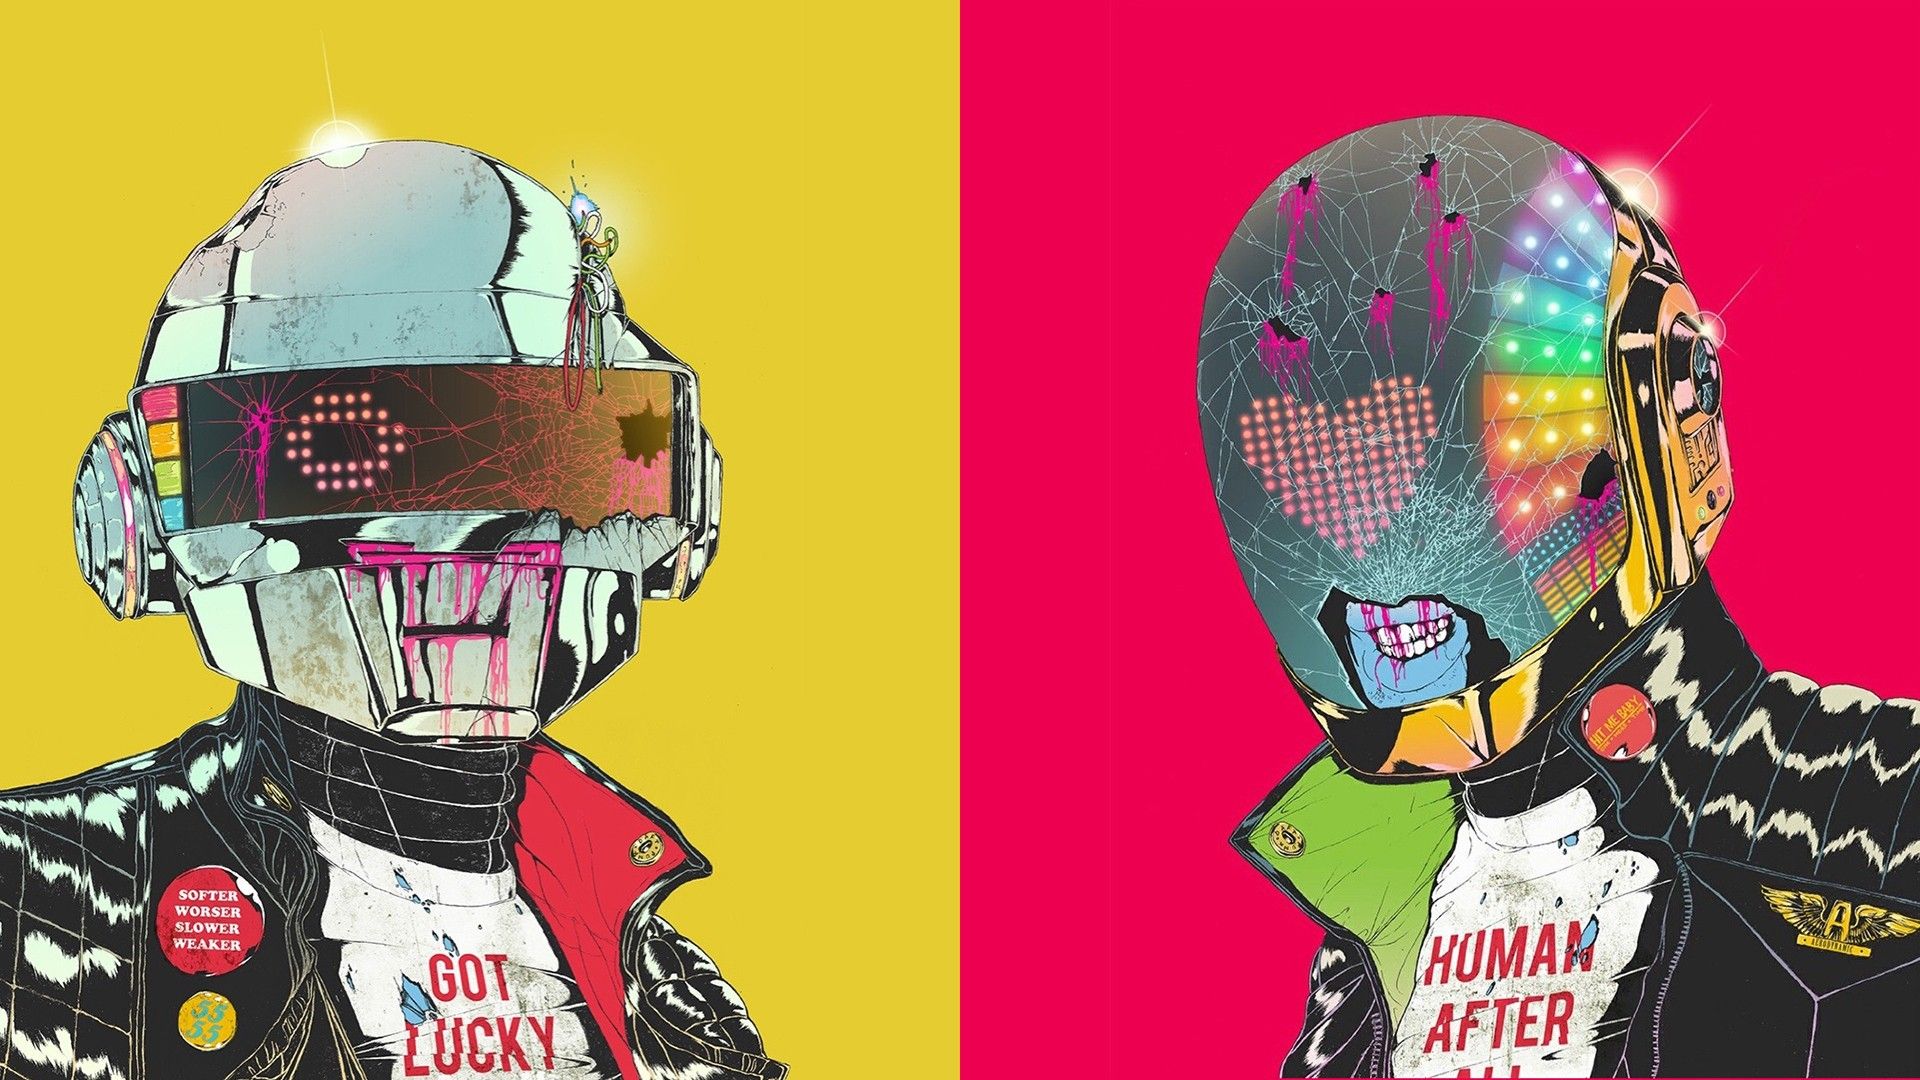 A poster with two different images of people - Punk